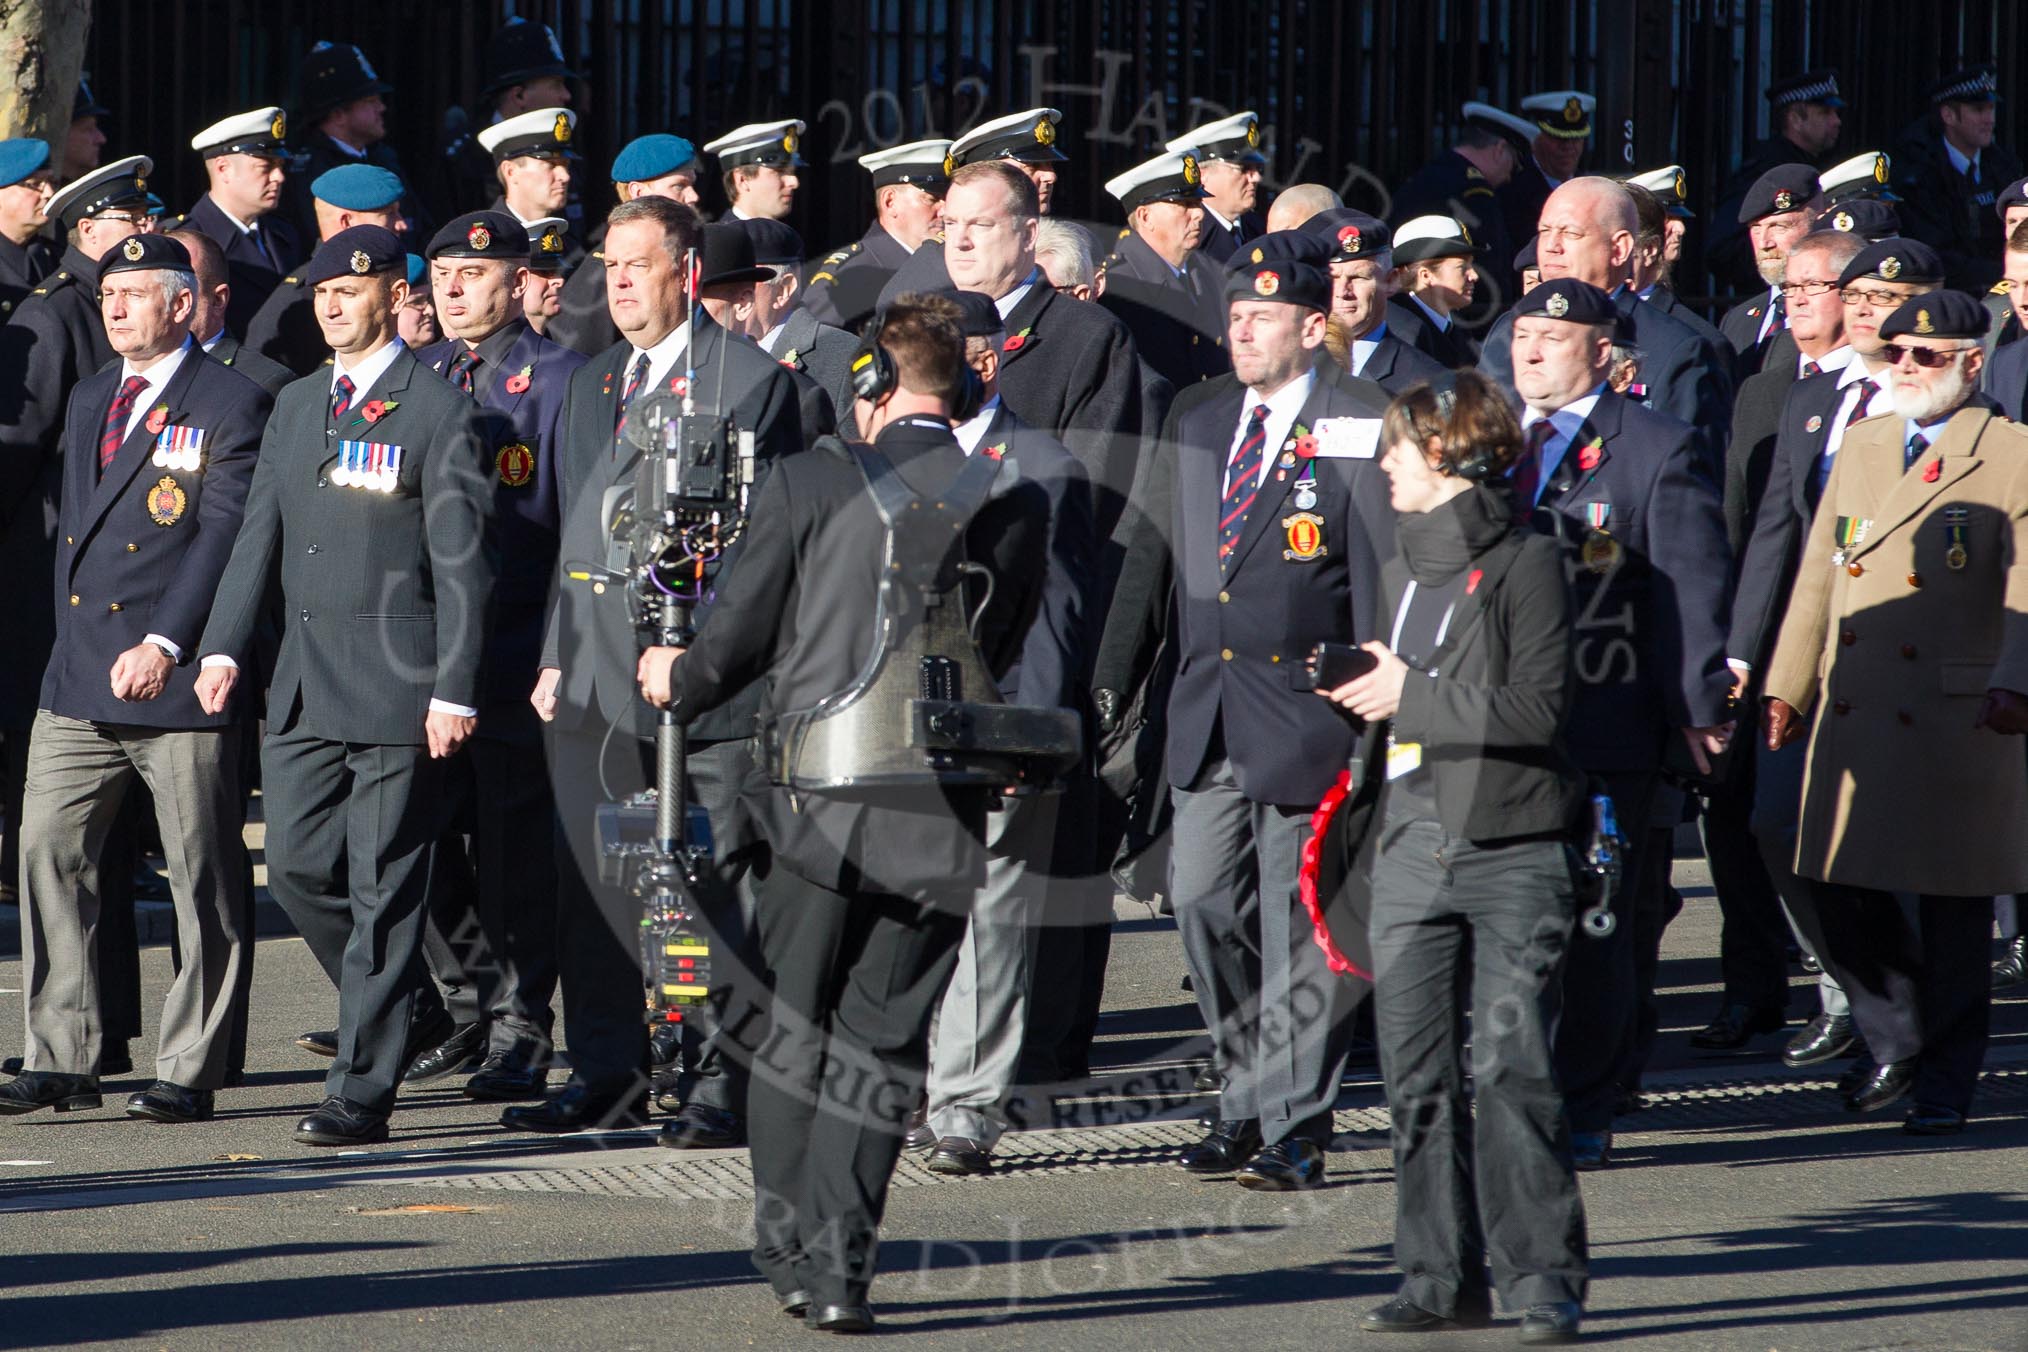 Remembrance Sunday 2012 Cenotaph March Past: Group B27 - Royal Engineers Bomb Disposal Association..
Whitehall, Cenotaph,
London SW1,

United Kingdom,
on 11 November 2012 at 11:59, image #984